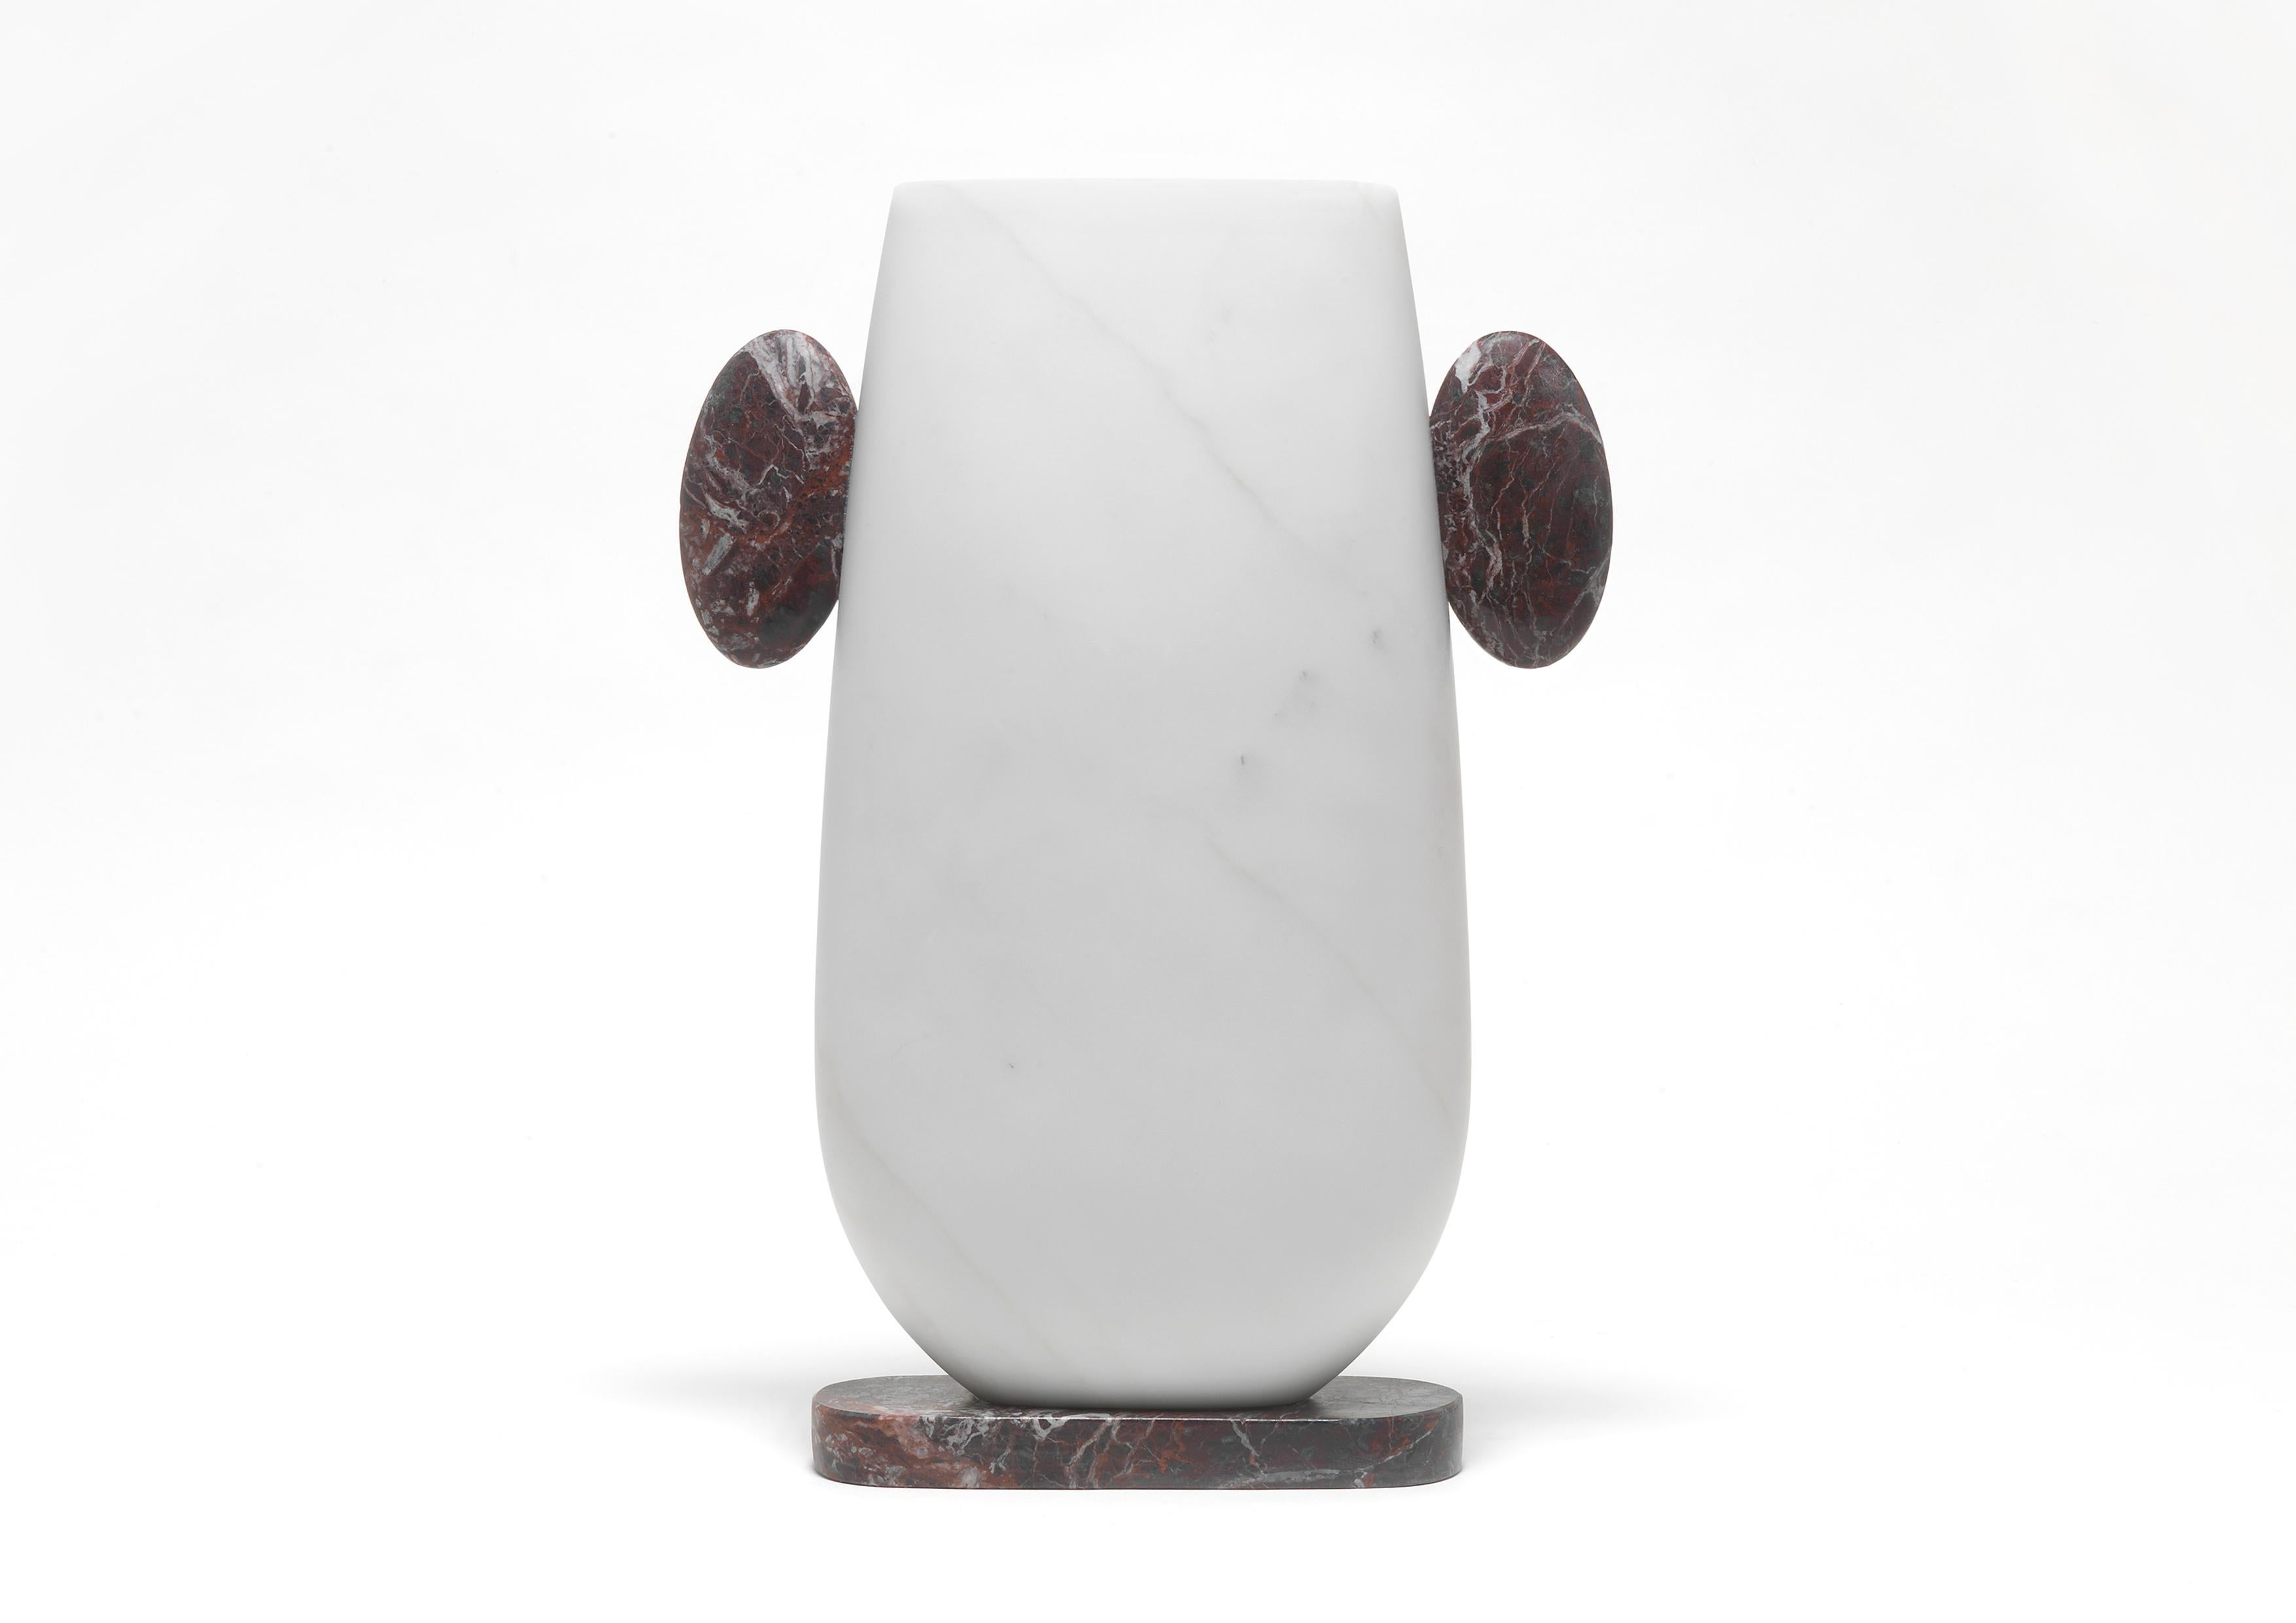 Pietro marble vase by Matteo Cibic
Dimensions: 10.7 x 2.9 x 15.1 cm
Materials: 
Bianco
Michelangelo,
Rosso Levanto

Vases made of various marbles cannot guarantee watertightness, better not use for cut flowers unless with the use vials for each